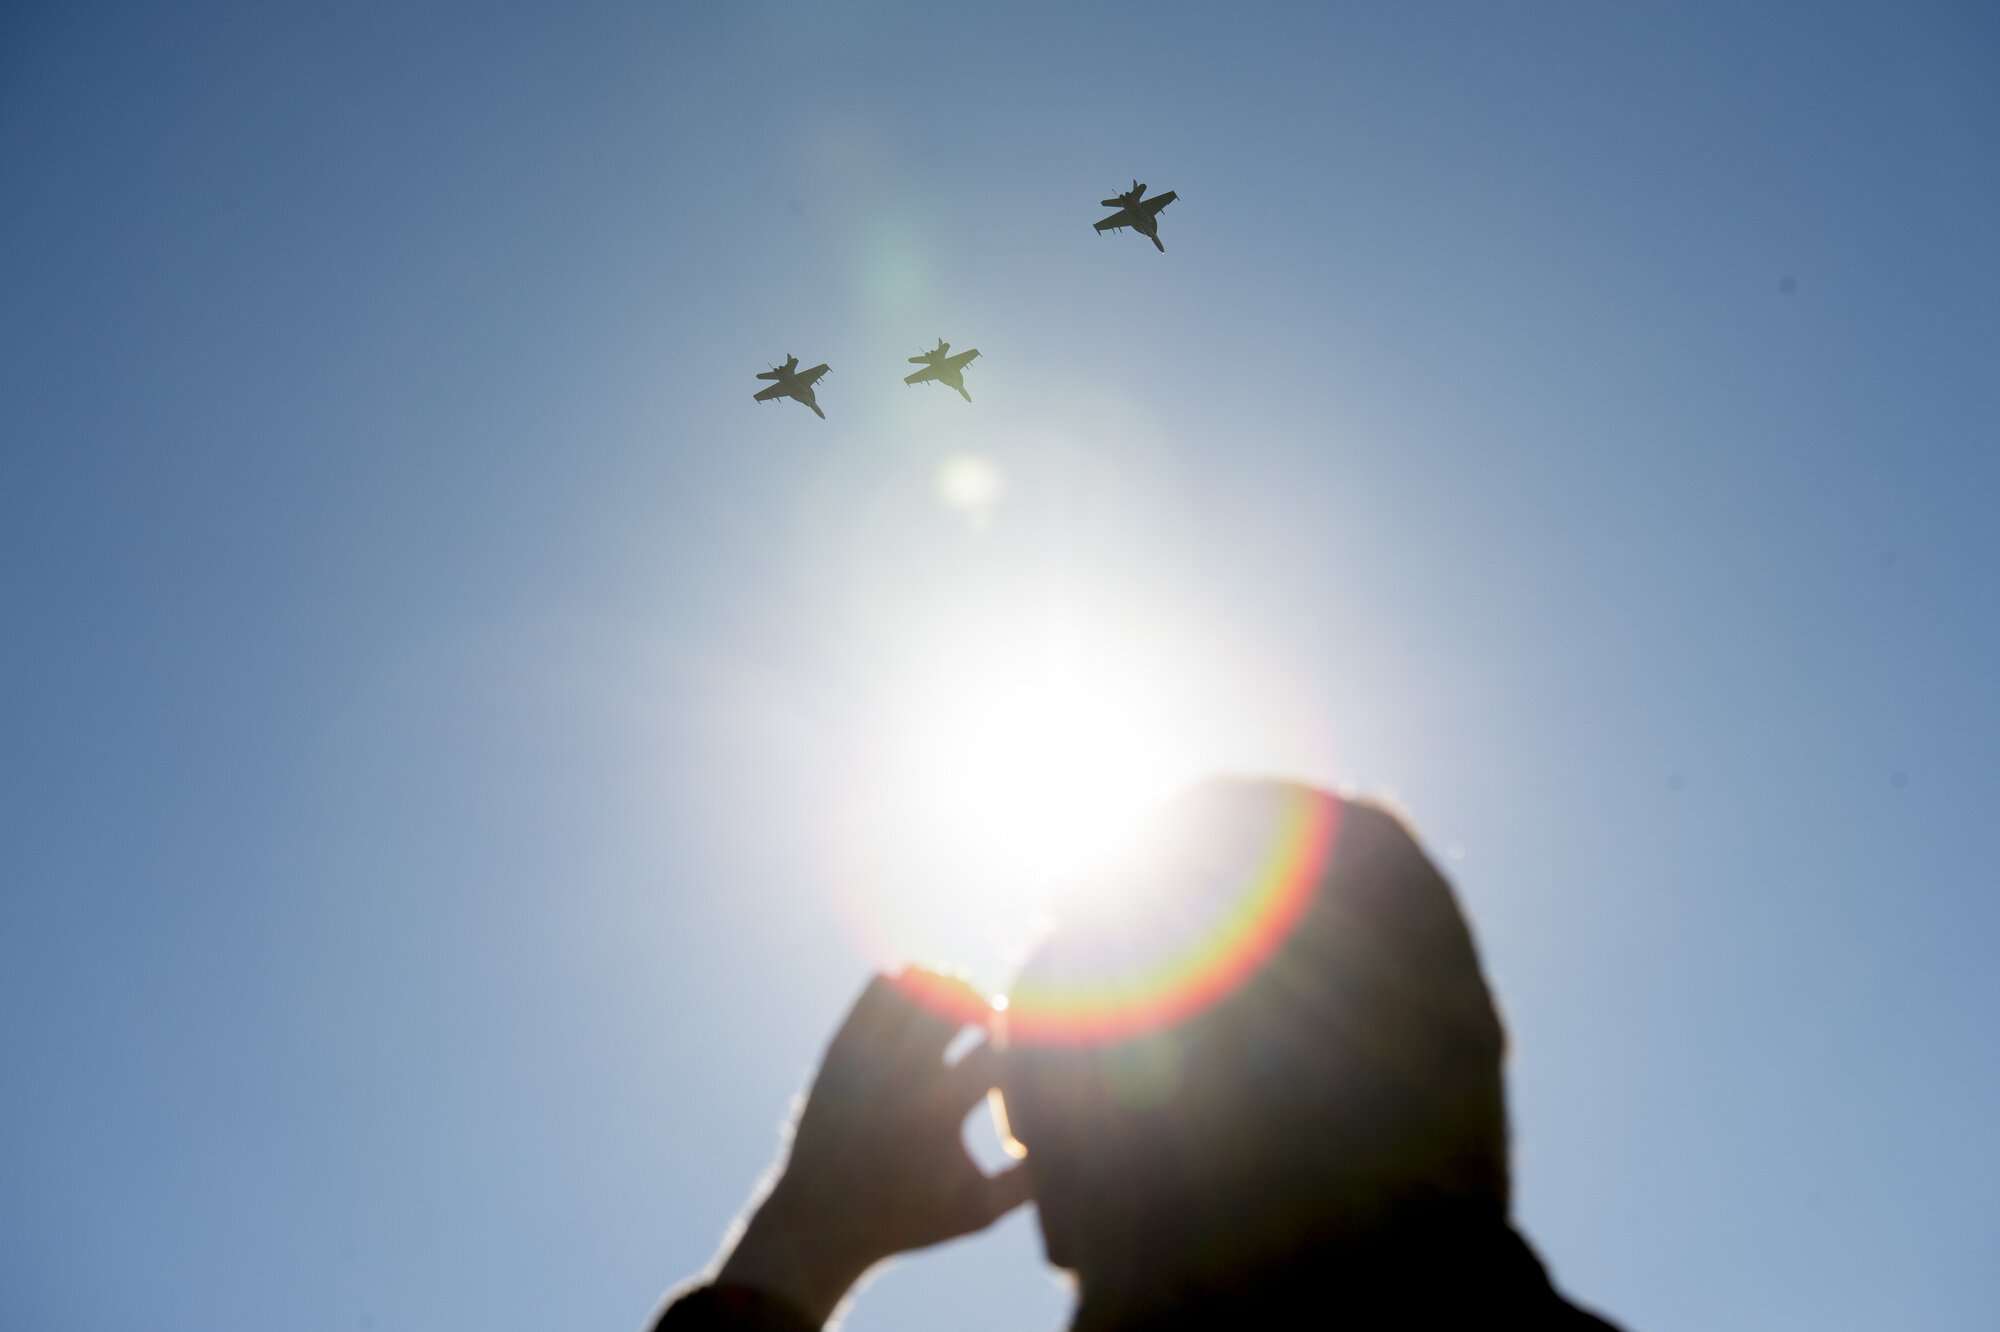  Three of the four fighter jets fly above a graveside service for Rosemary Mariner, the US Navy's first female fighter pilot, at New Loyston Cemetery in Maynardville, Tennessee on Saturday, February 2, 2019. The jets were flown by four female fighter